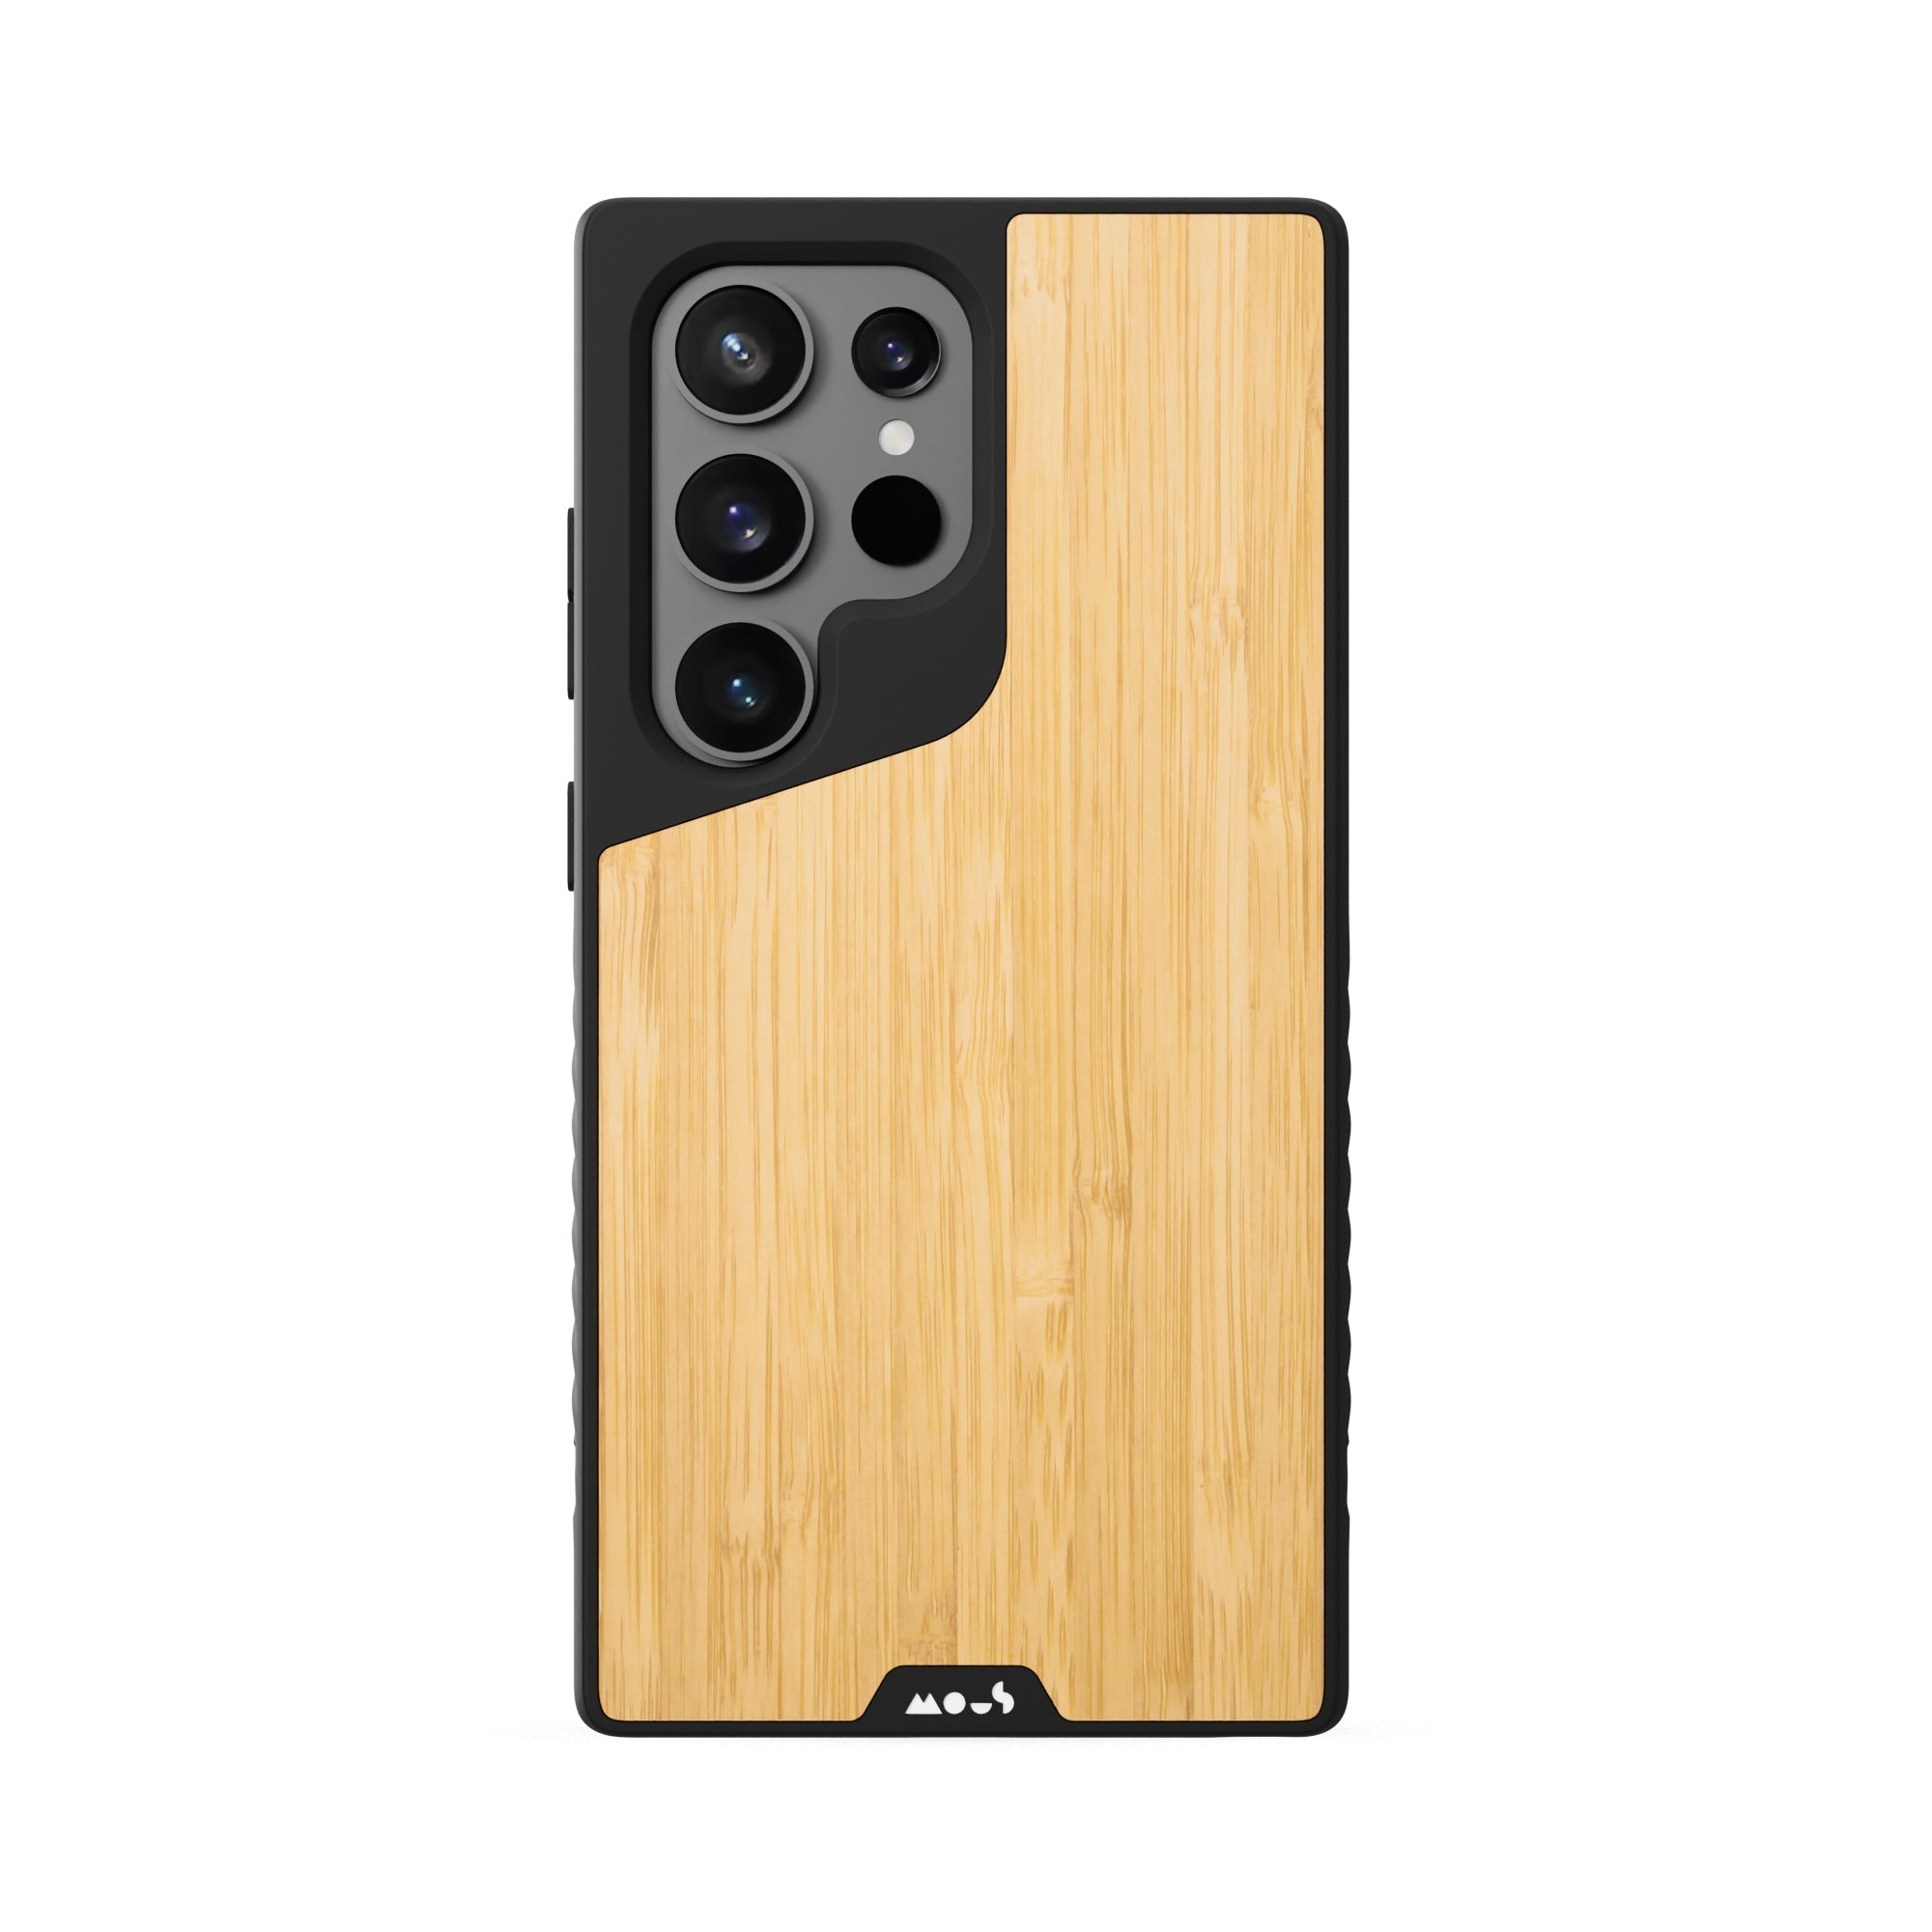 Vazico I-Phone Series 11, 12, 13, 14, 15 Case Compatible Bamboo Phone Case - Limitless 5.0